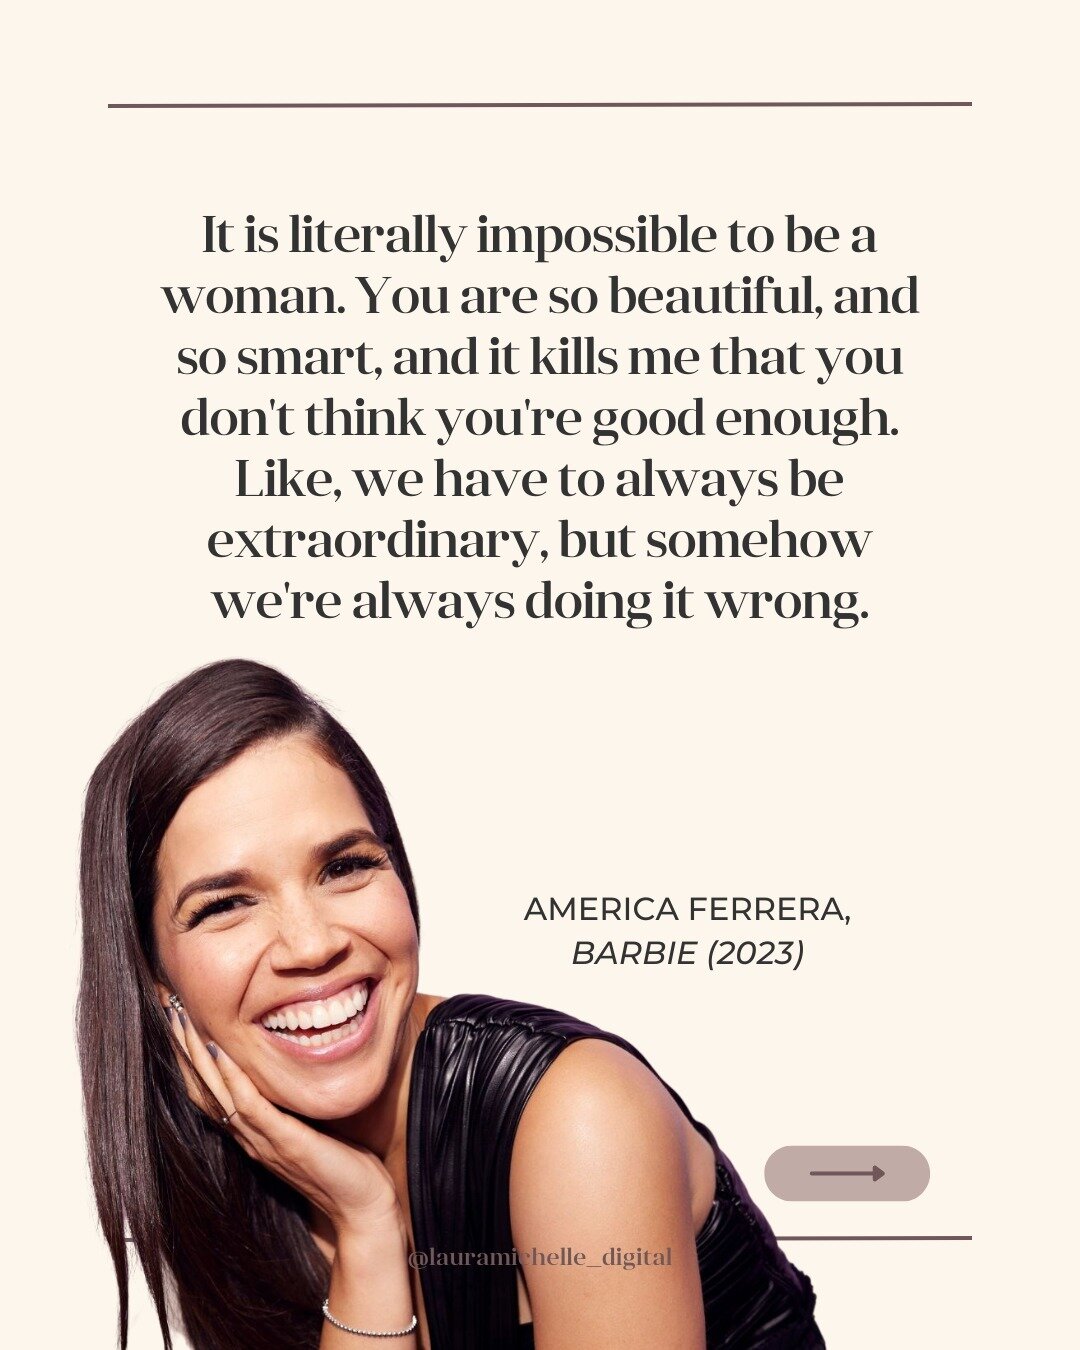 Happy International Women&rsquo;s Day to all the remarkable women who are making significant contributions to their little corners of the world! ❤️

I wanted to share Greta Gerwig's speech, delivered by America Ferrera's character in Barbie. It was t